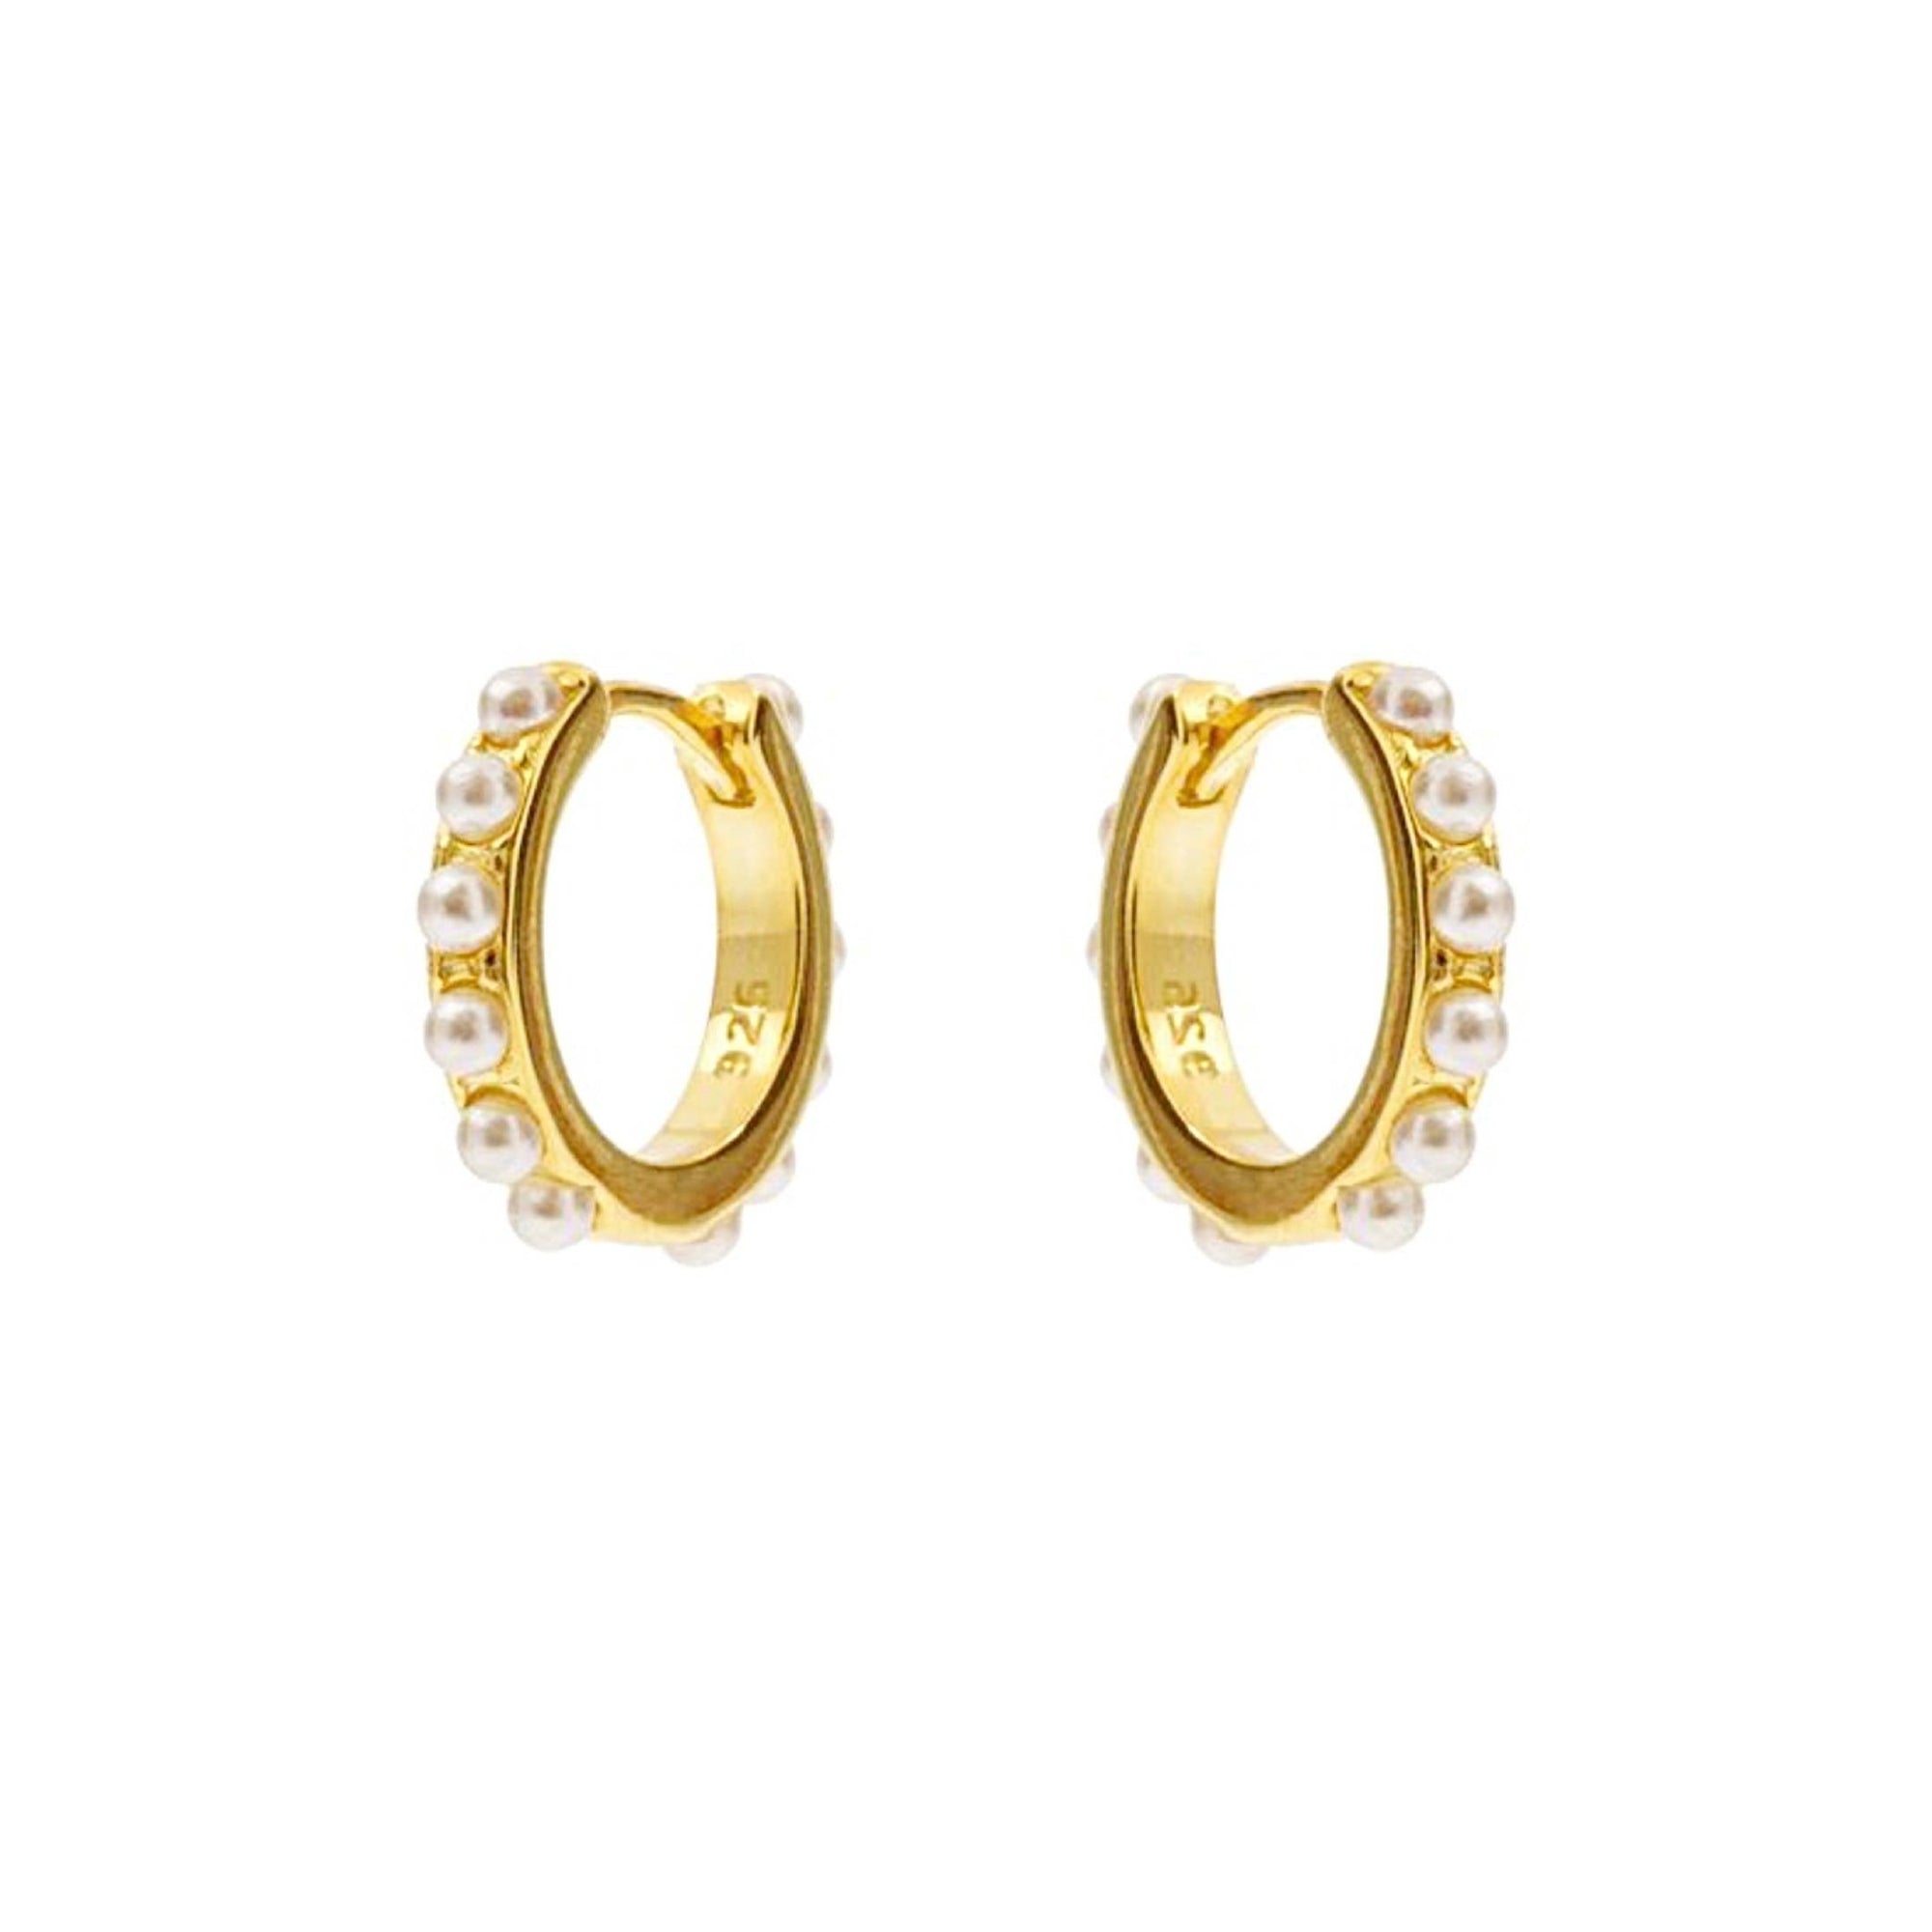 Small Gold Huggie Hoop Earrings with Tiny Natural Pearls, 18K Gold, Abigail Fox